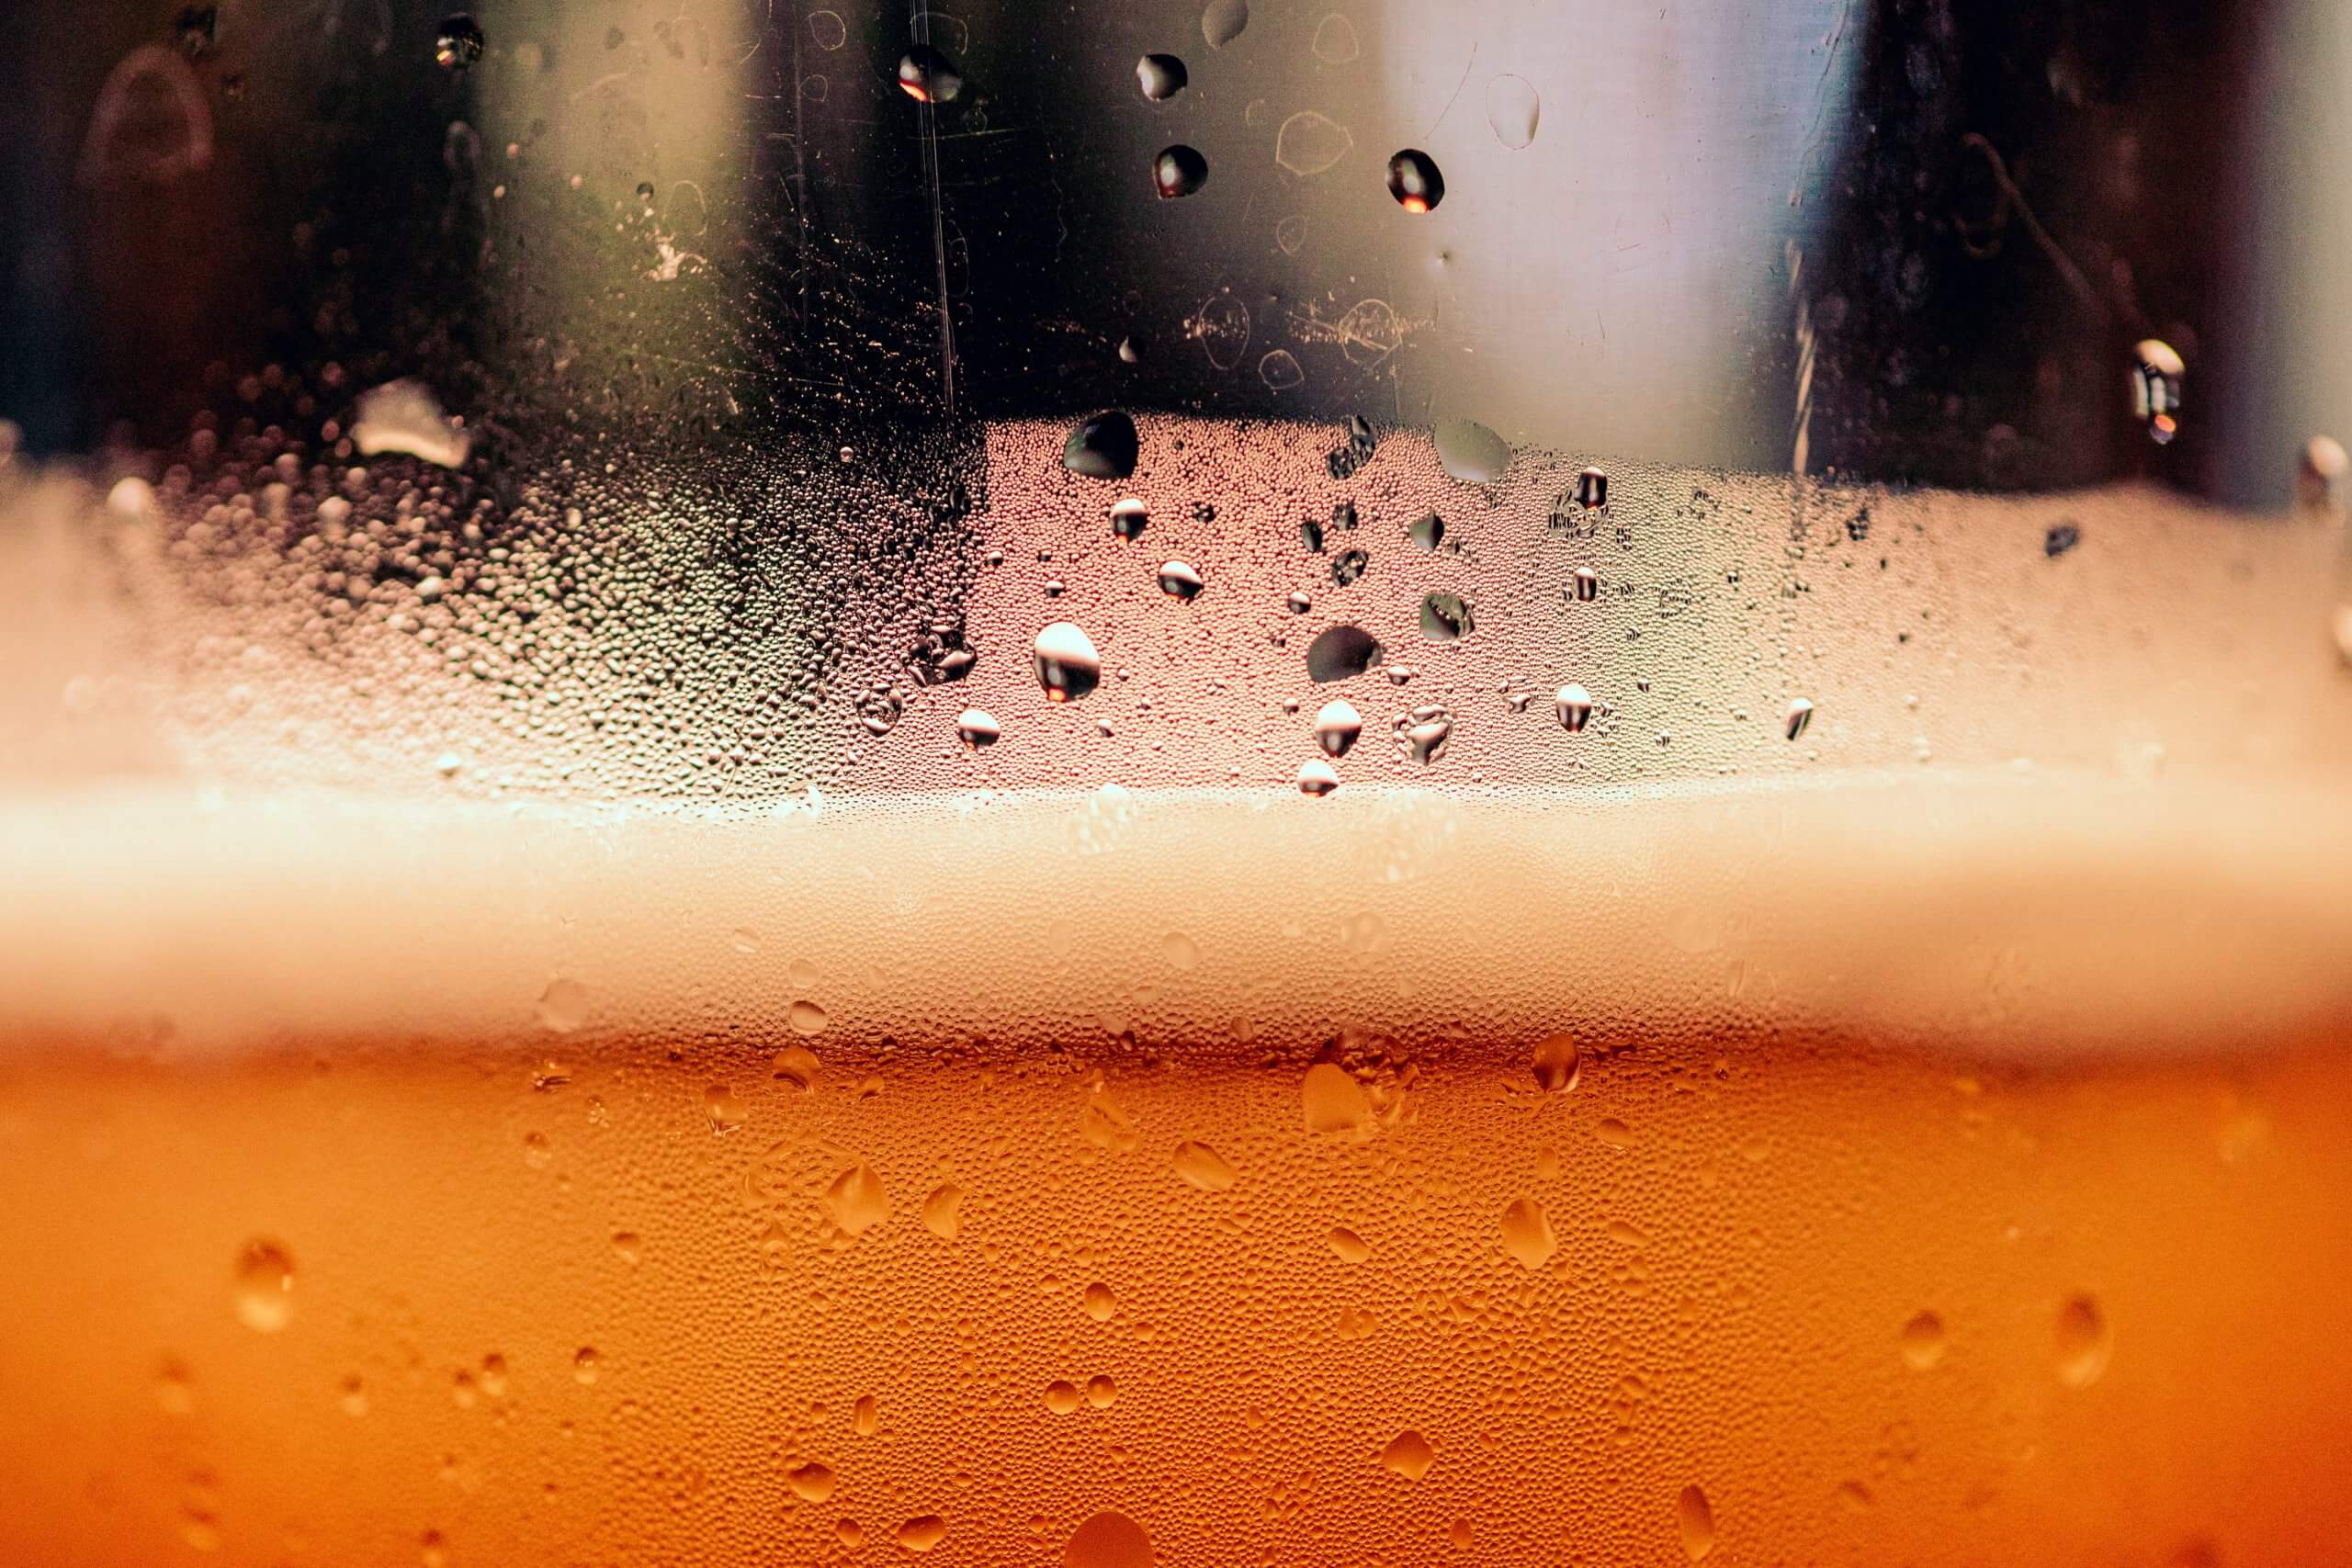 Closeup of bubbles in a glass of beer.